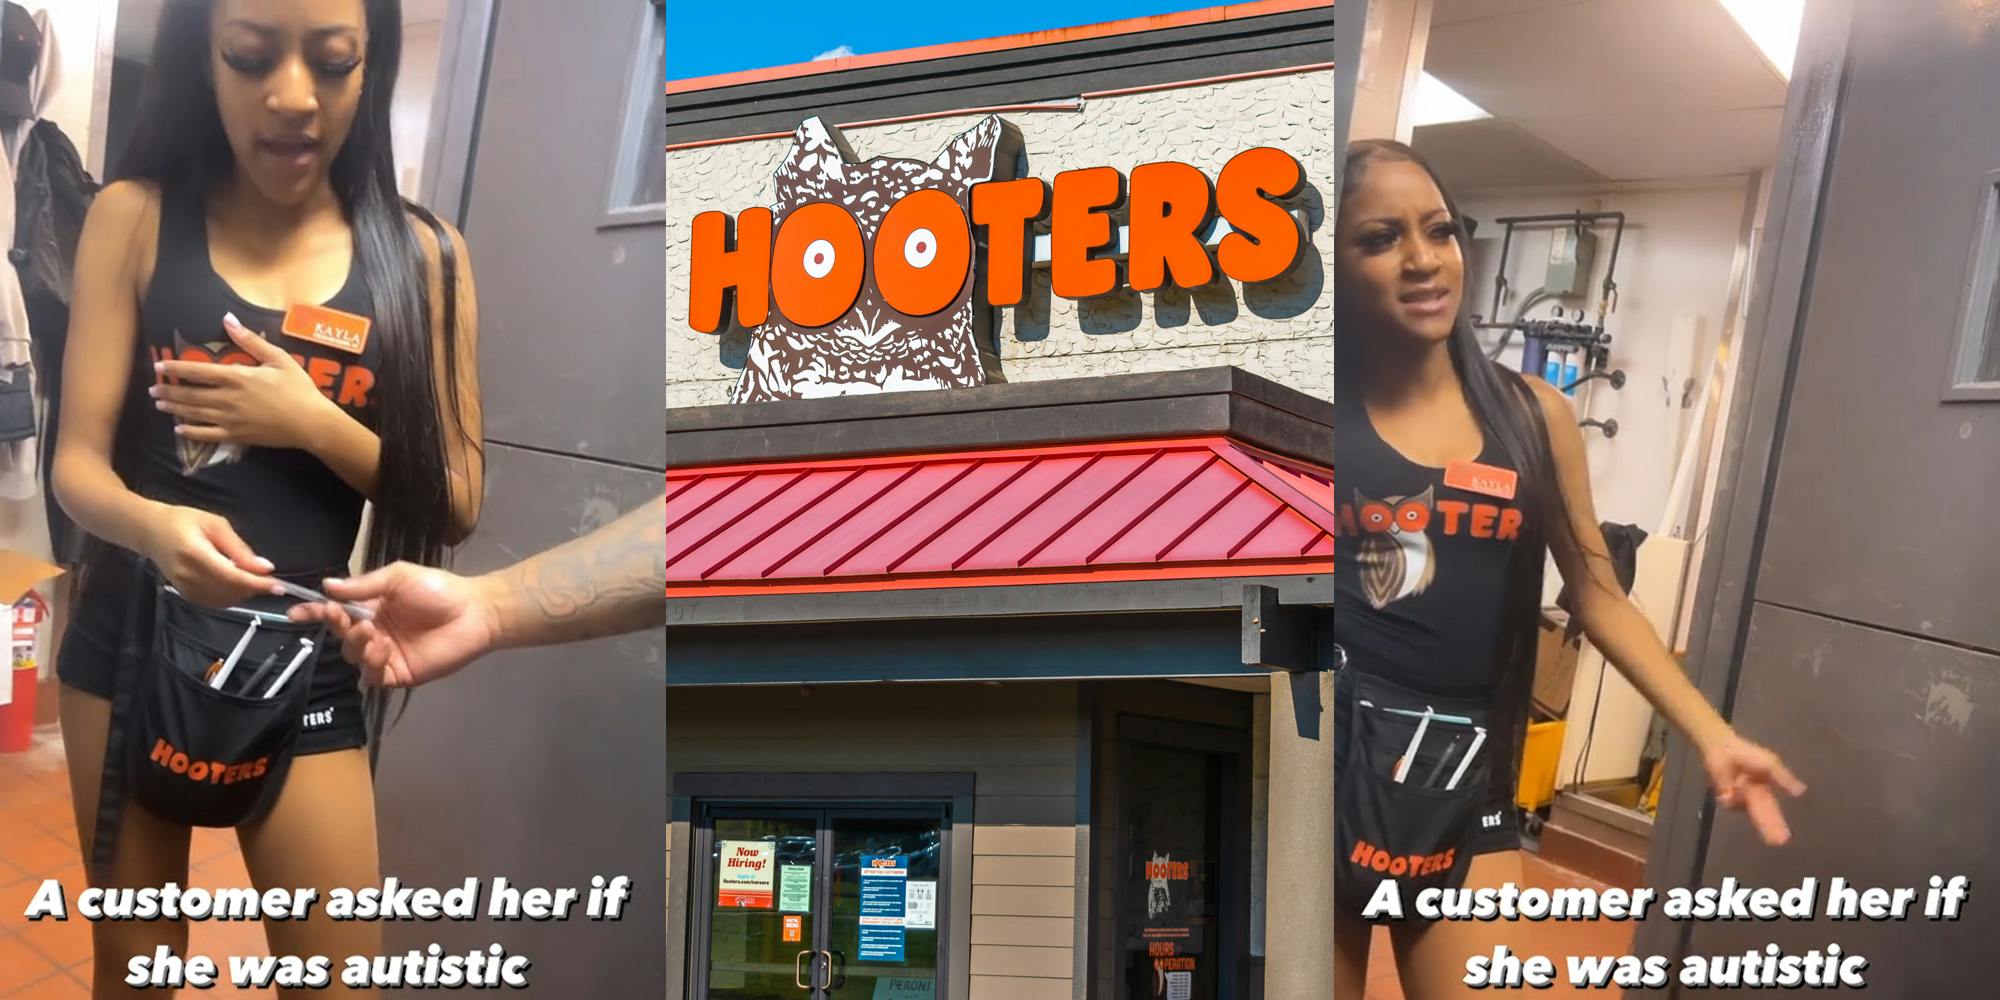 Hooters server speaking with caption "A customer asked her if she was autistic" (l) Hooters building with sign (c) Hooters server speaking with caption "A customer asked her if she was autistic" (r)